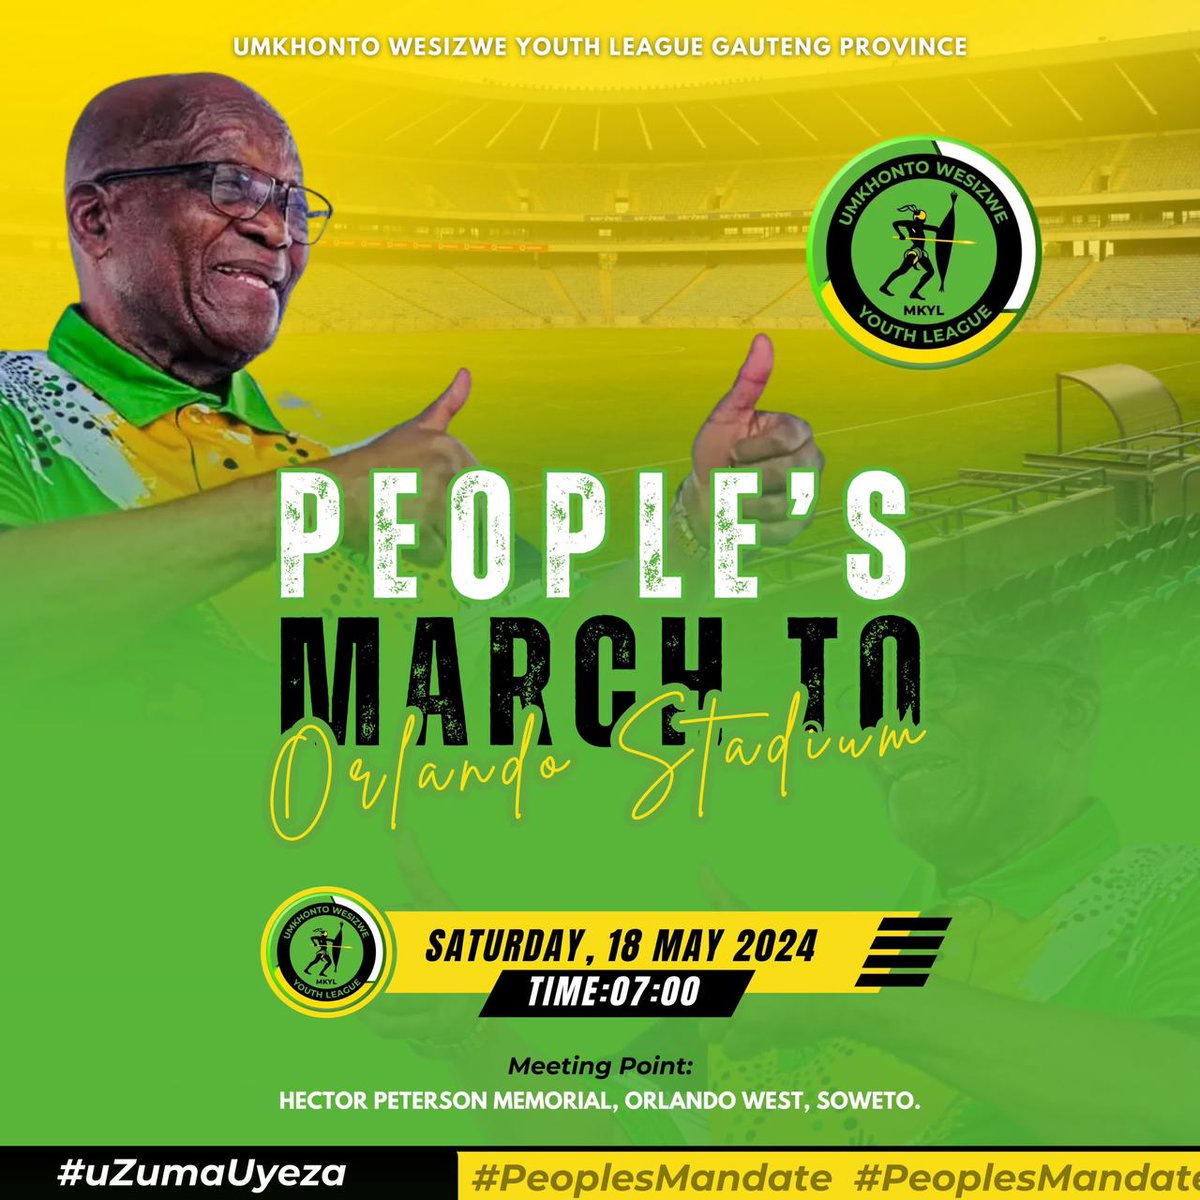 People's March to Orlando Stadium by the MK Youth League. On 18 May 2024.

From the Hector Peterson Memorial, Orlando West, Soweto at 7am.

#ThePeoplesMandate  #MKInOrlandoStadium 

Gwaza Mkhonto! #VoteMK2024